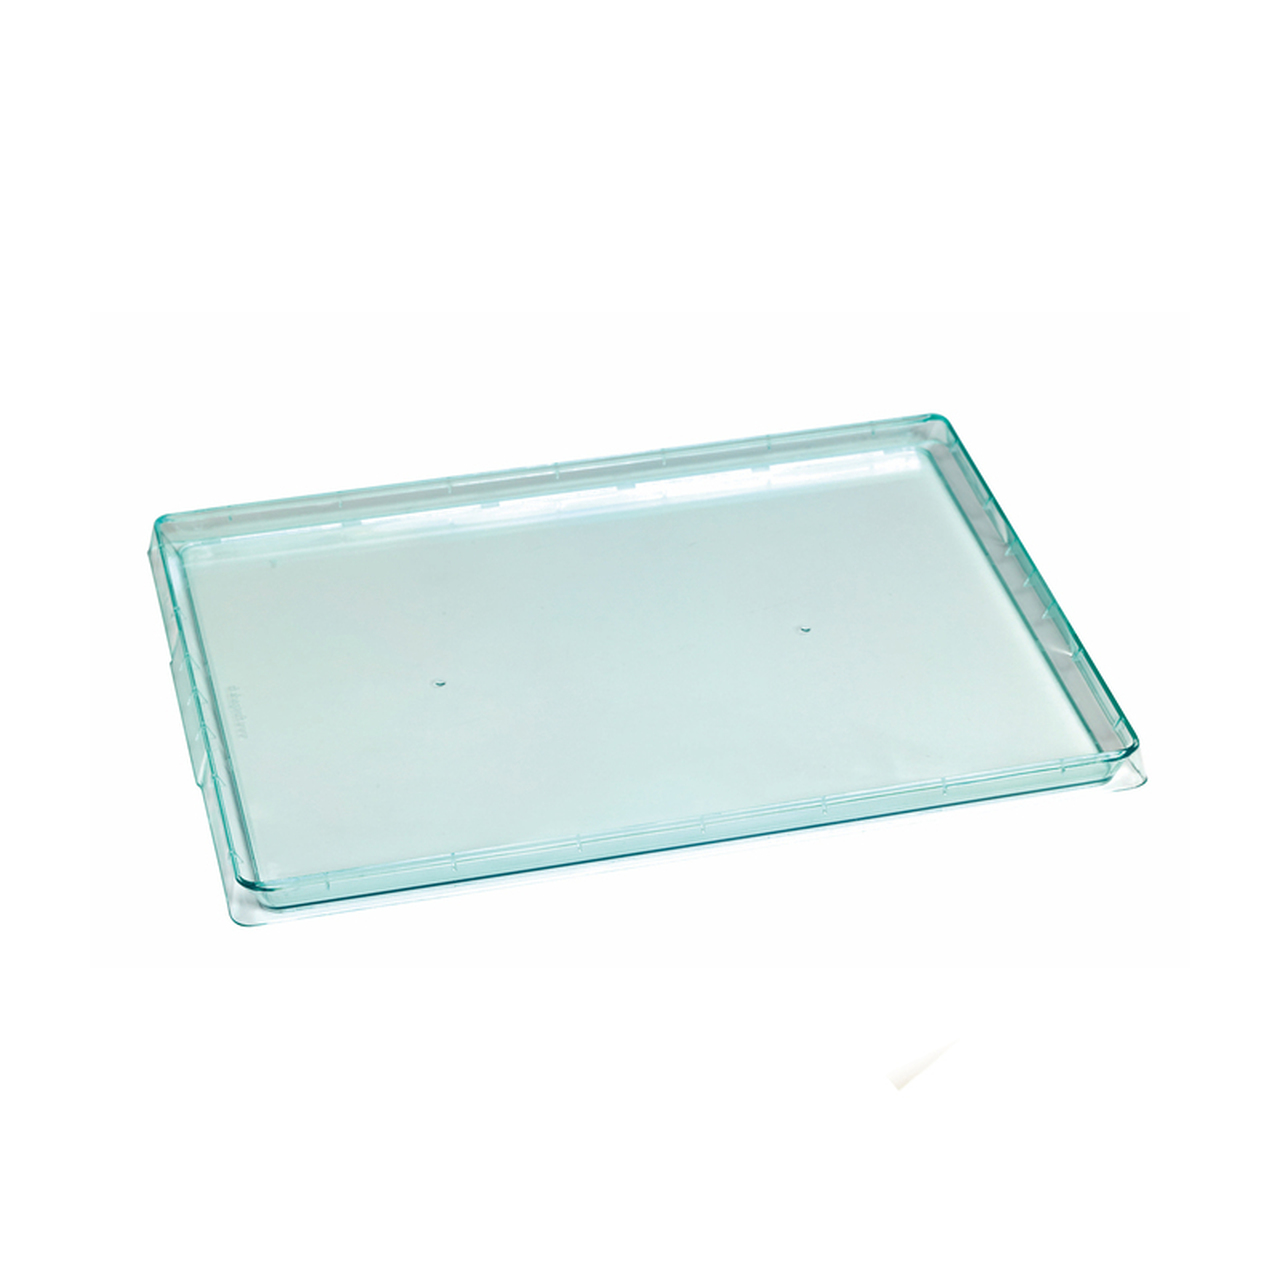 5 Large Clear Plastic Food Sandwich Platter Catering Trays with Lids 450x350mm 